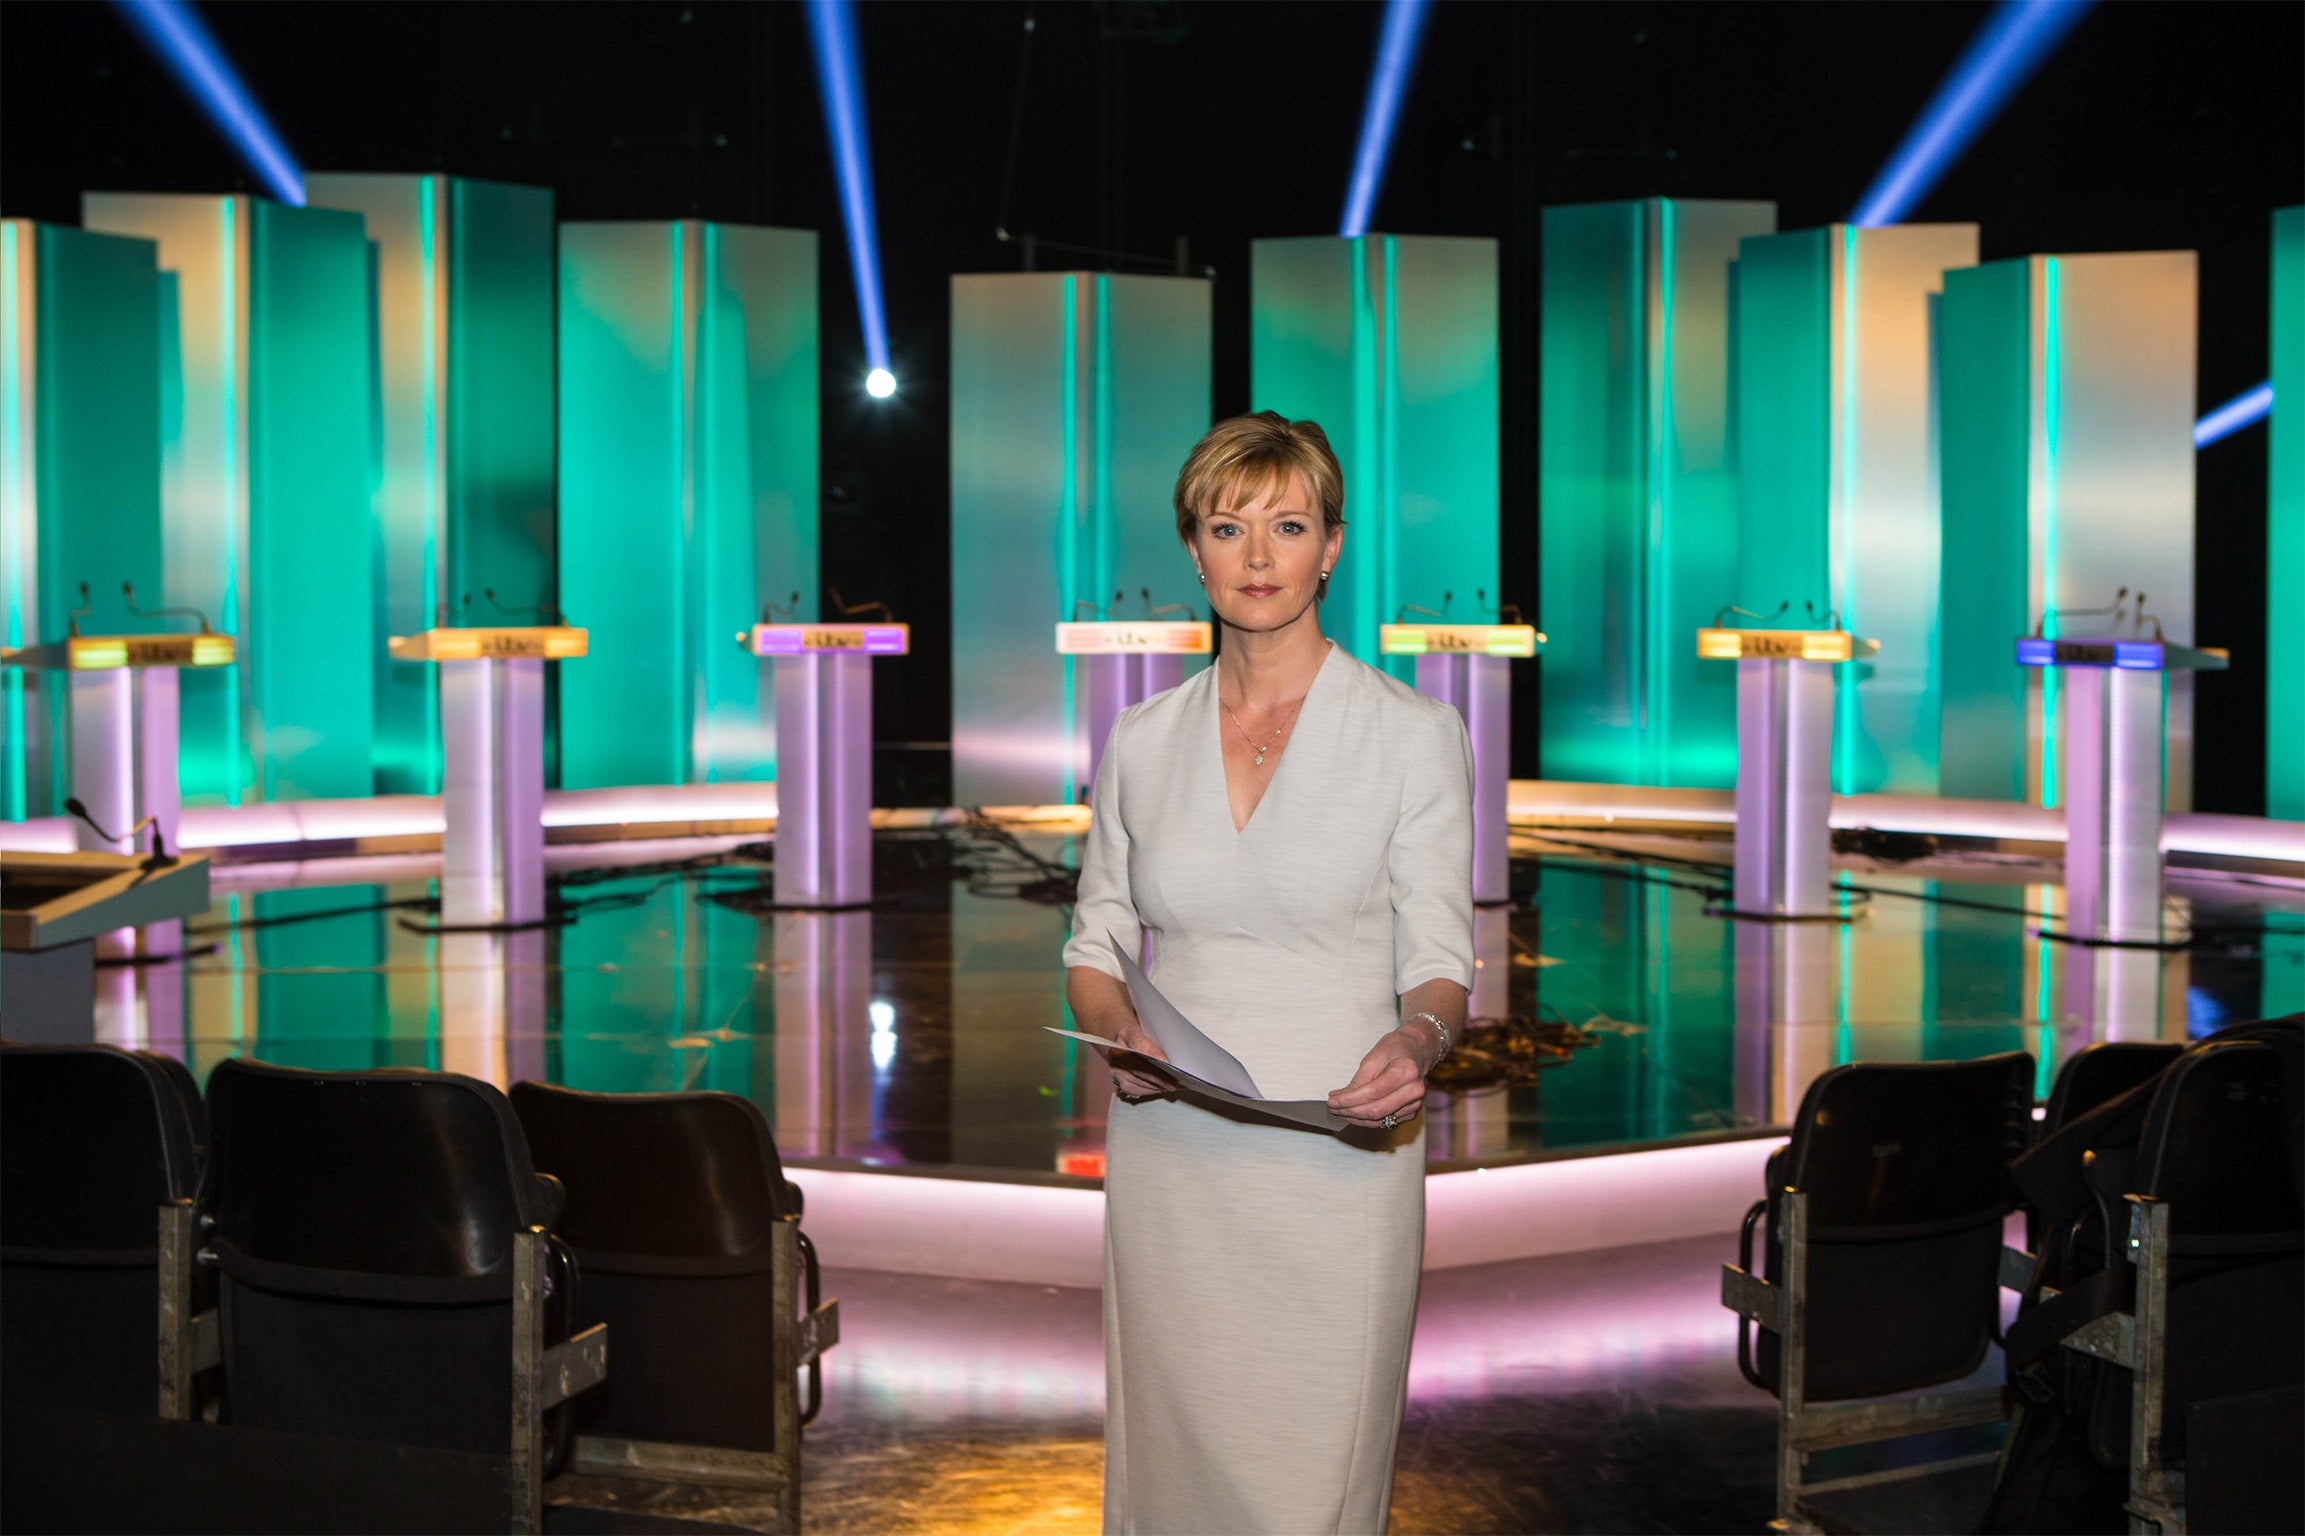 Julie Etchingham Who Is The Presenter Overseeing The Itv Leaders Debate The Independent